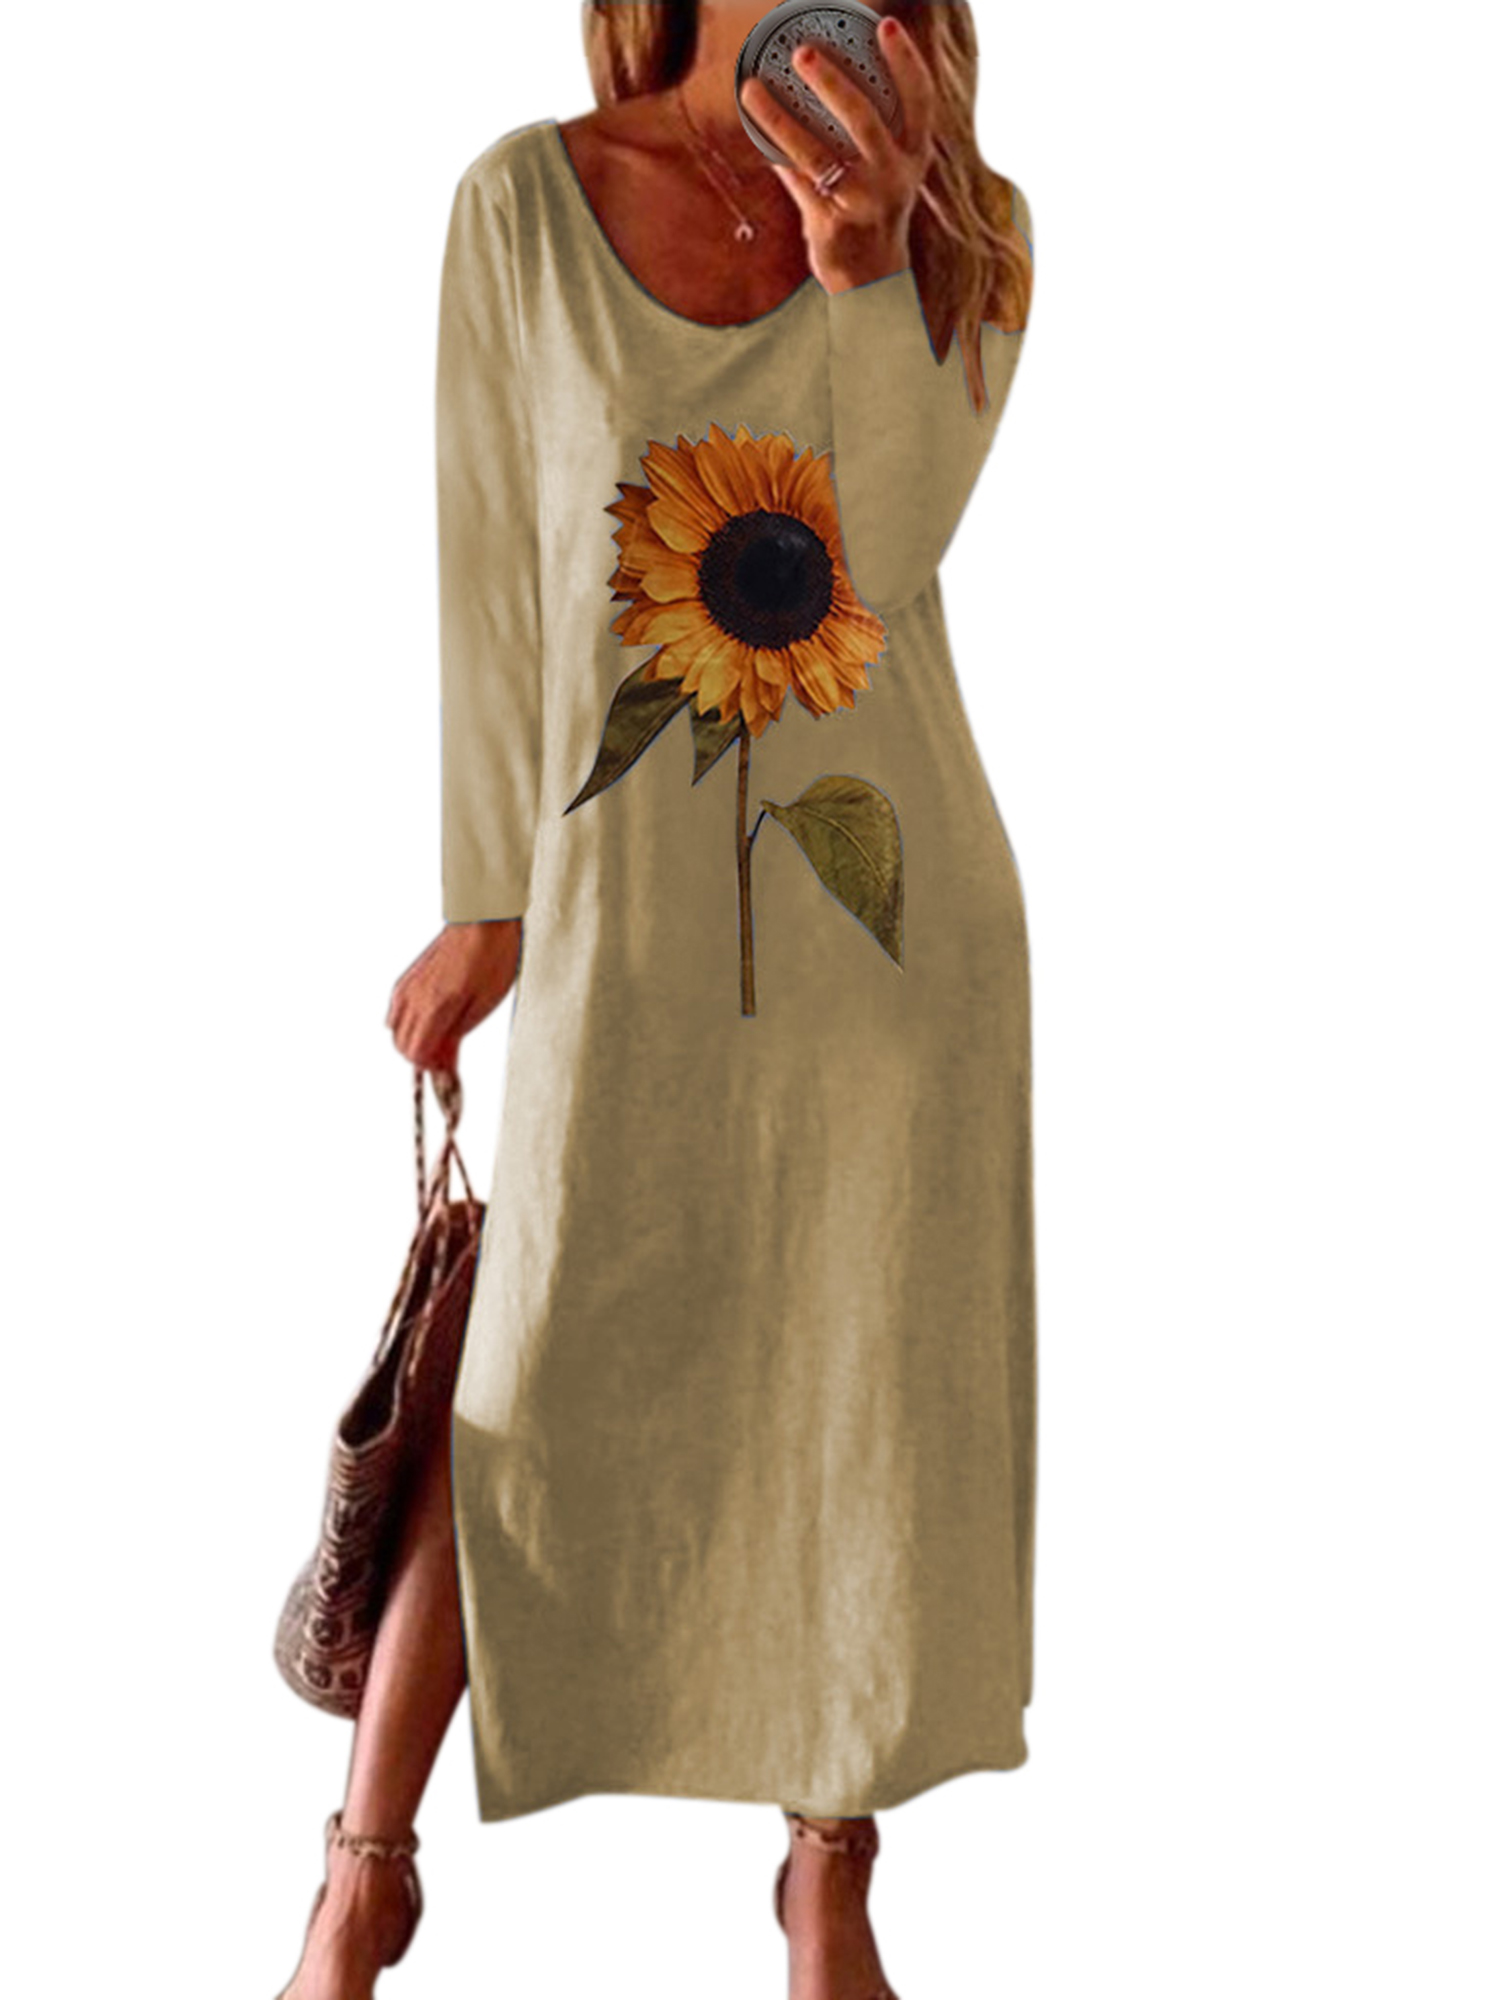 Sexy Dance Plus Size Long Sleeve T Shirt Dress For Women Print Maxi Dress Ladies Holiday Party Split A-Line Dresses Casual Loose Sunflower Print Tunic Kaftan Dress - image 1 of 2